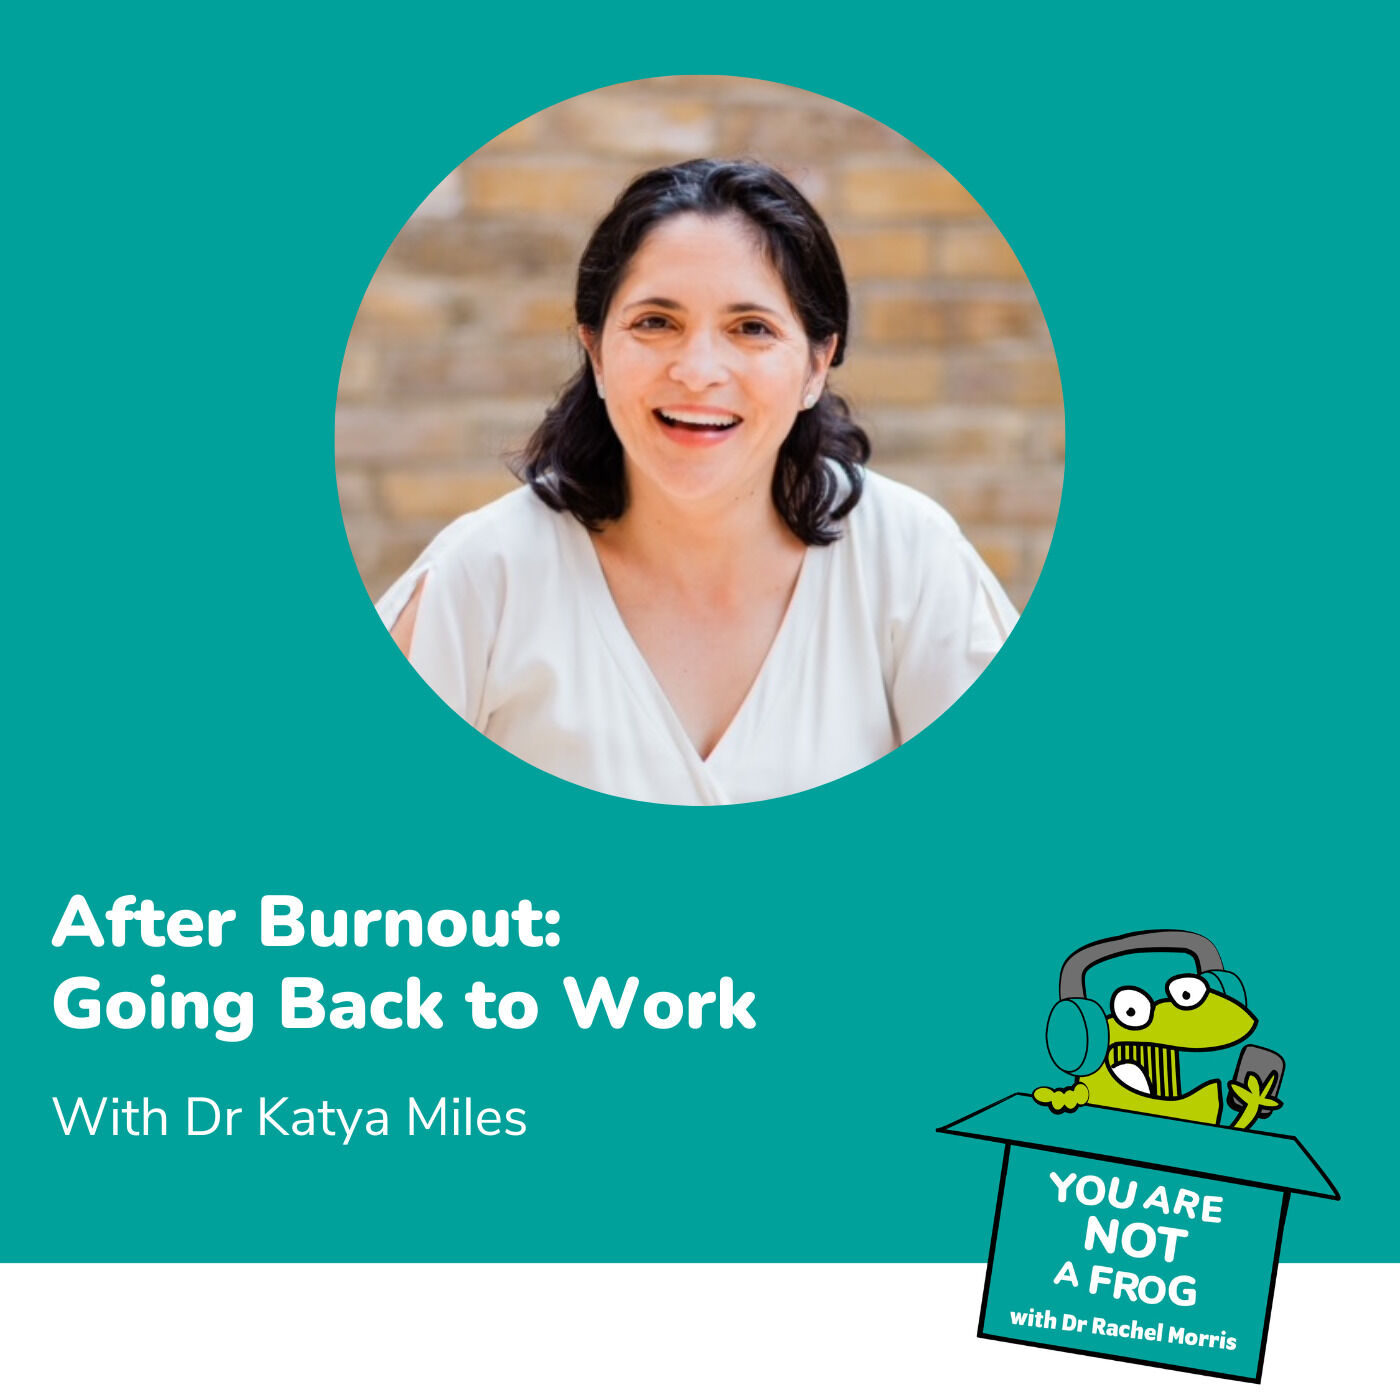 After Burnout: Going Back to Work with Dr Katya Miles